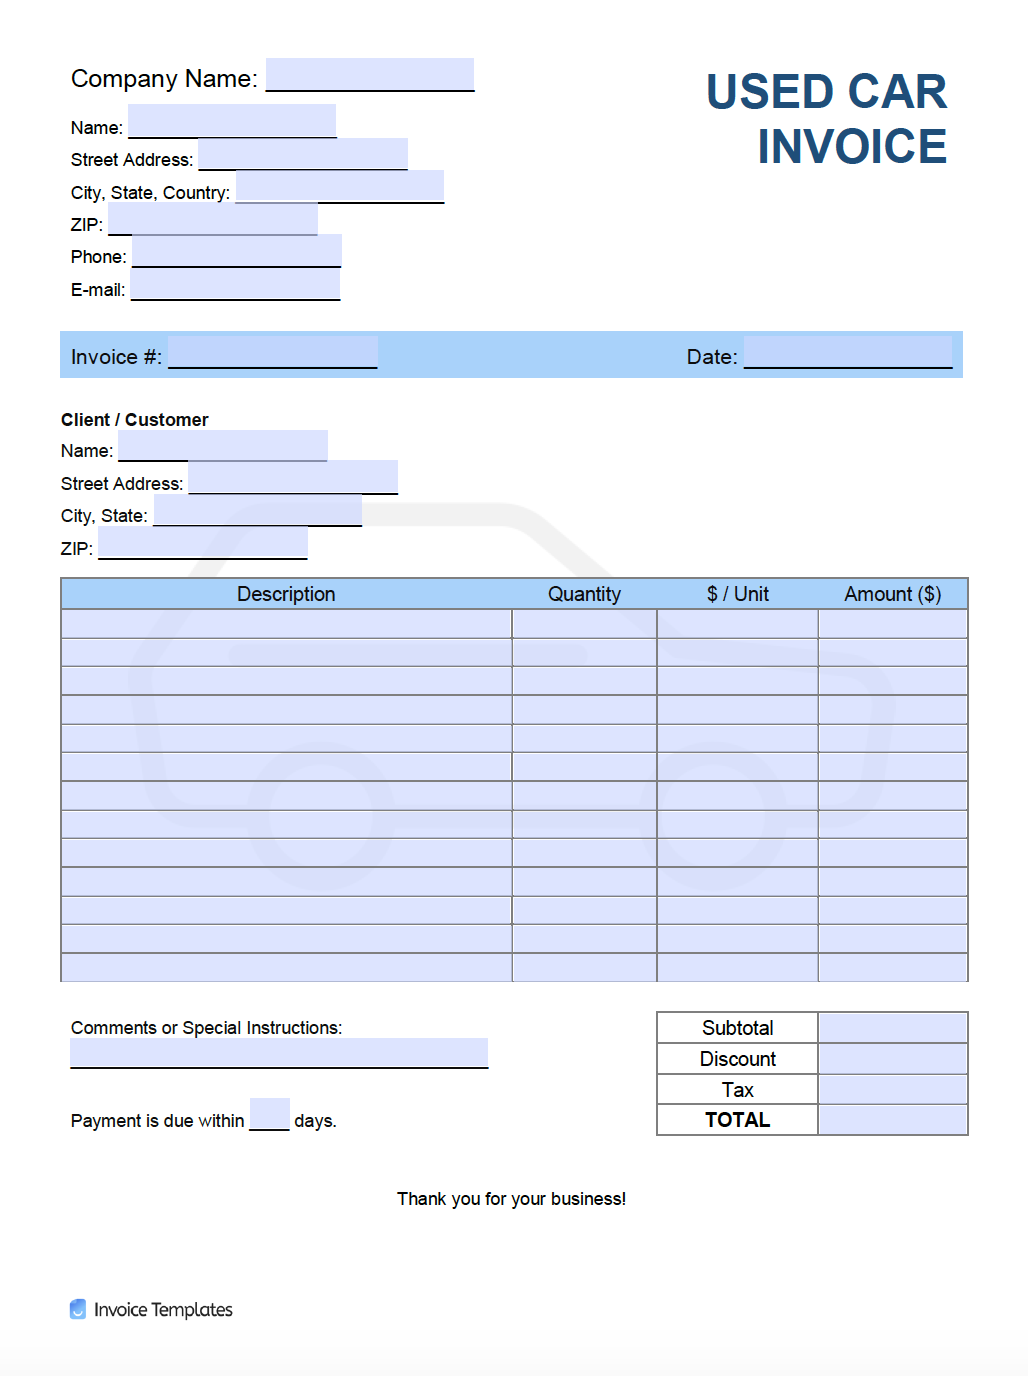 Free Used Car Invoice Template  PDF  WORD  EXCEL In Car Sales Invoice Template Uk